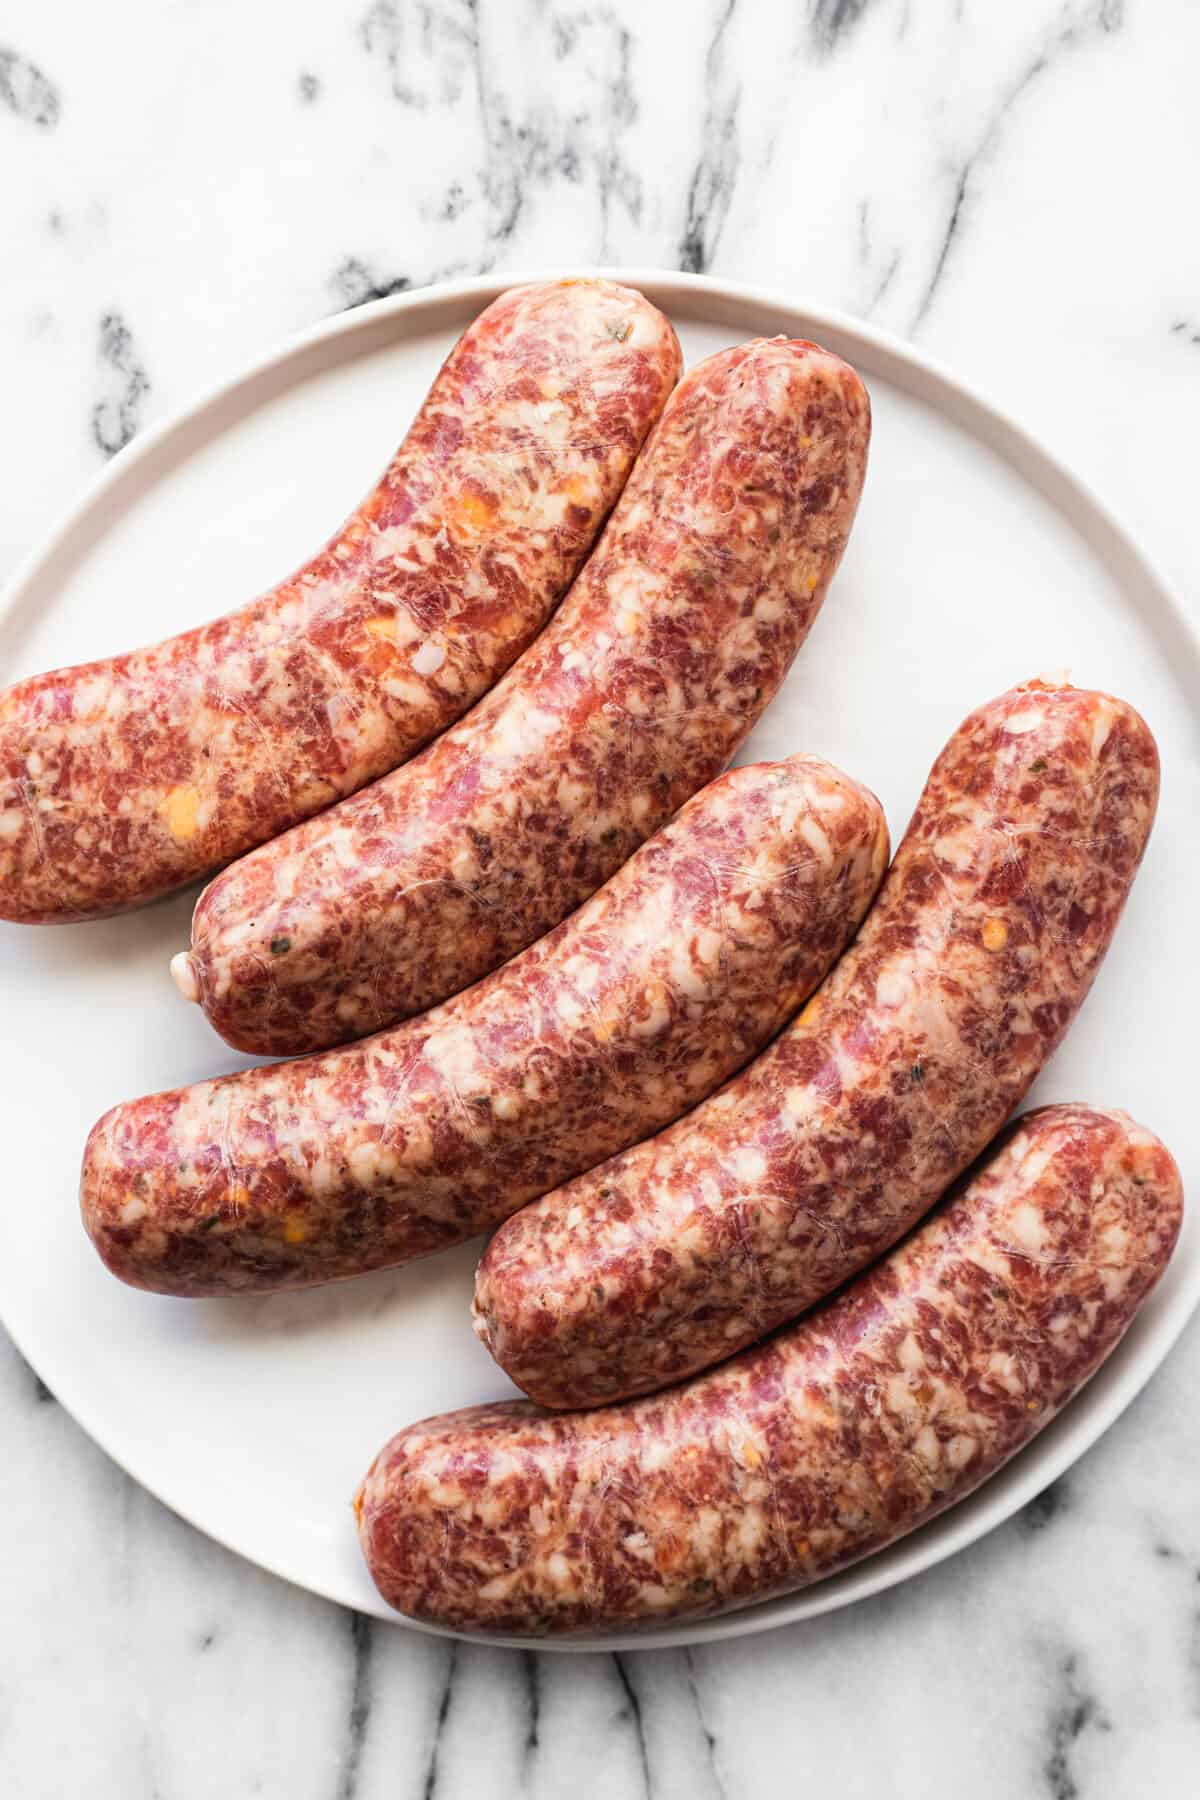 White plate with smoked cheddar jalapeno brats that are sliced.